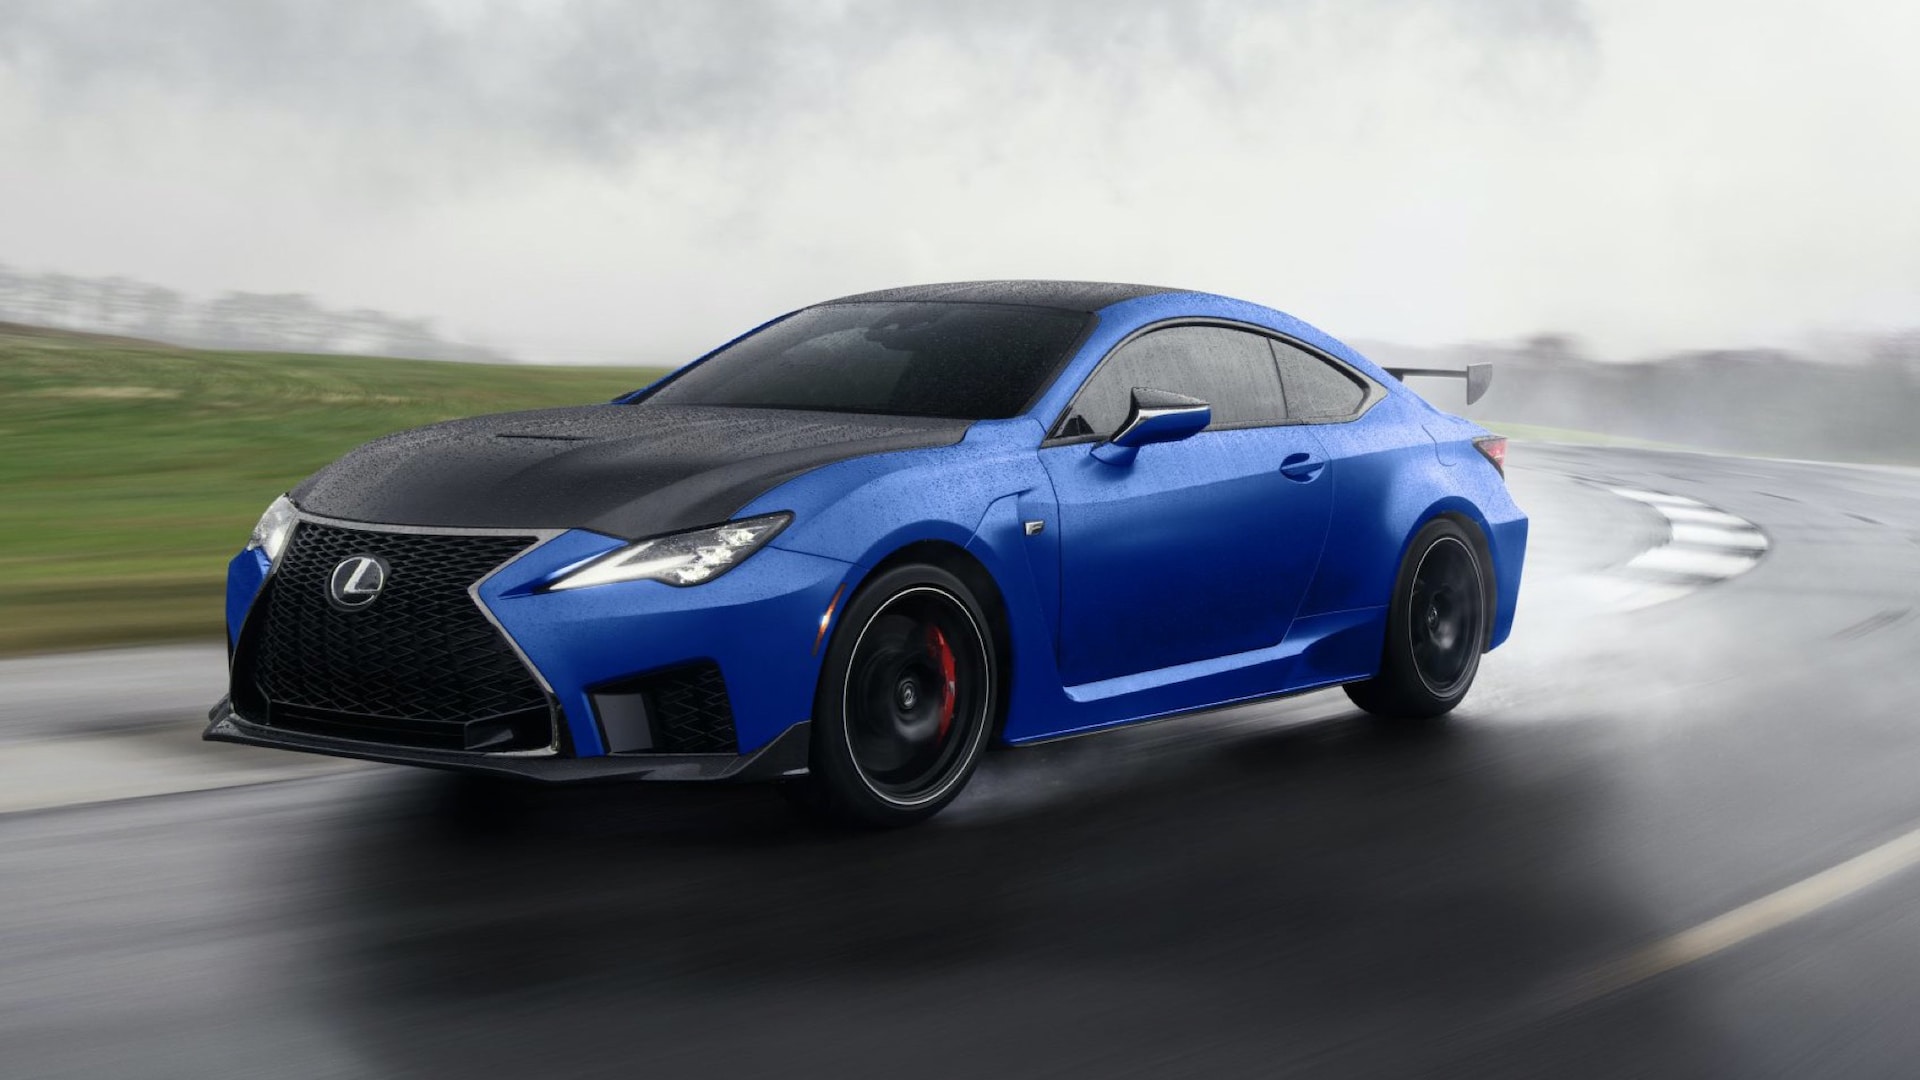 2022 Lexus RC Prices, Reviews, and Photos - MotorTrend